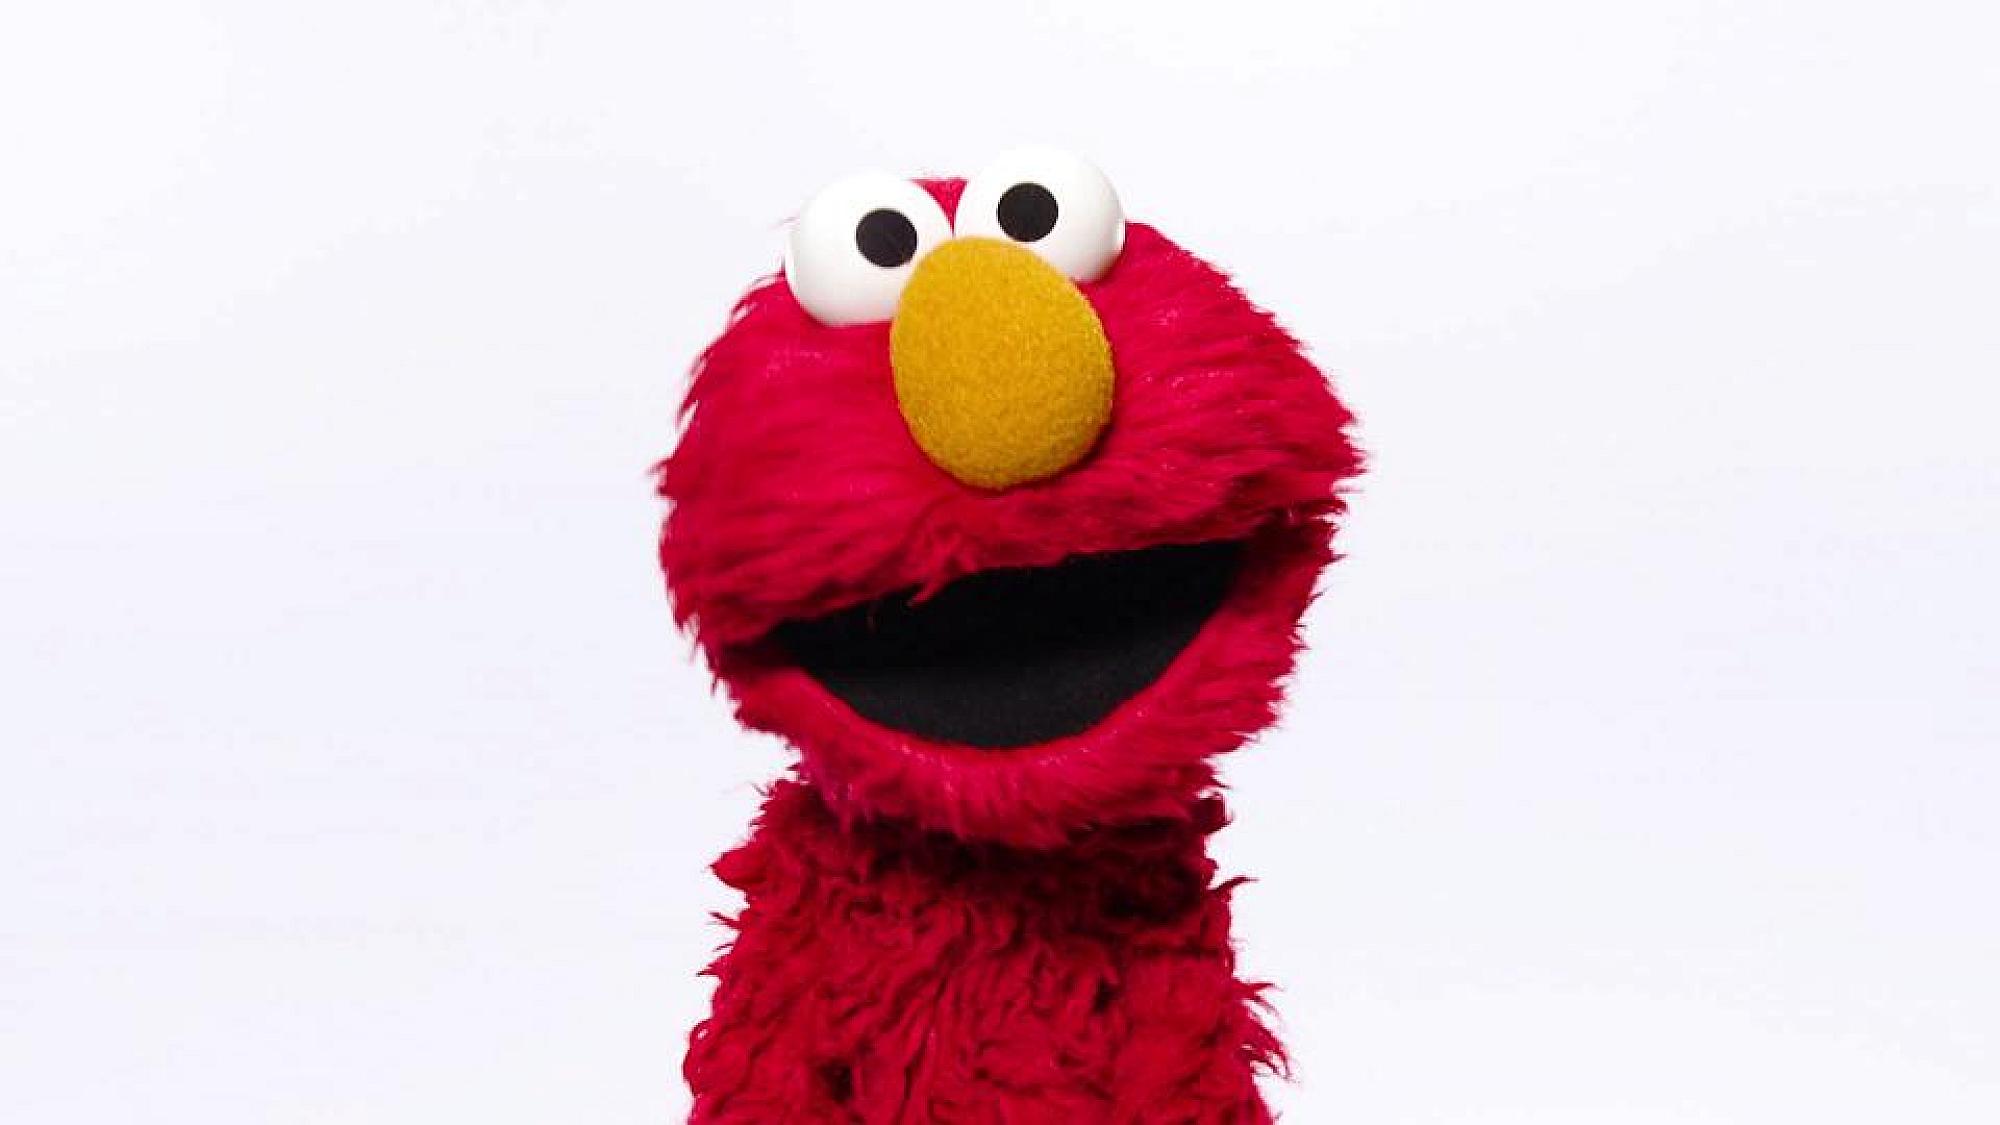 New PSA features Elmo and friends showing how humming can help support people’s emotional well-being as part of a series of activities for the ‘Love, Your Mind’ campaign.